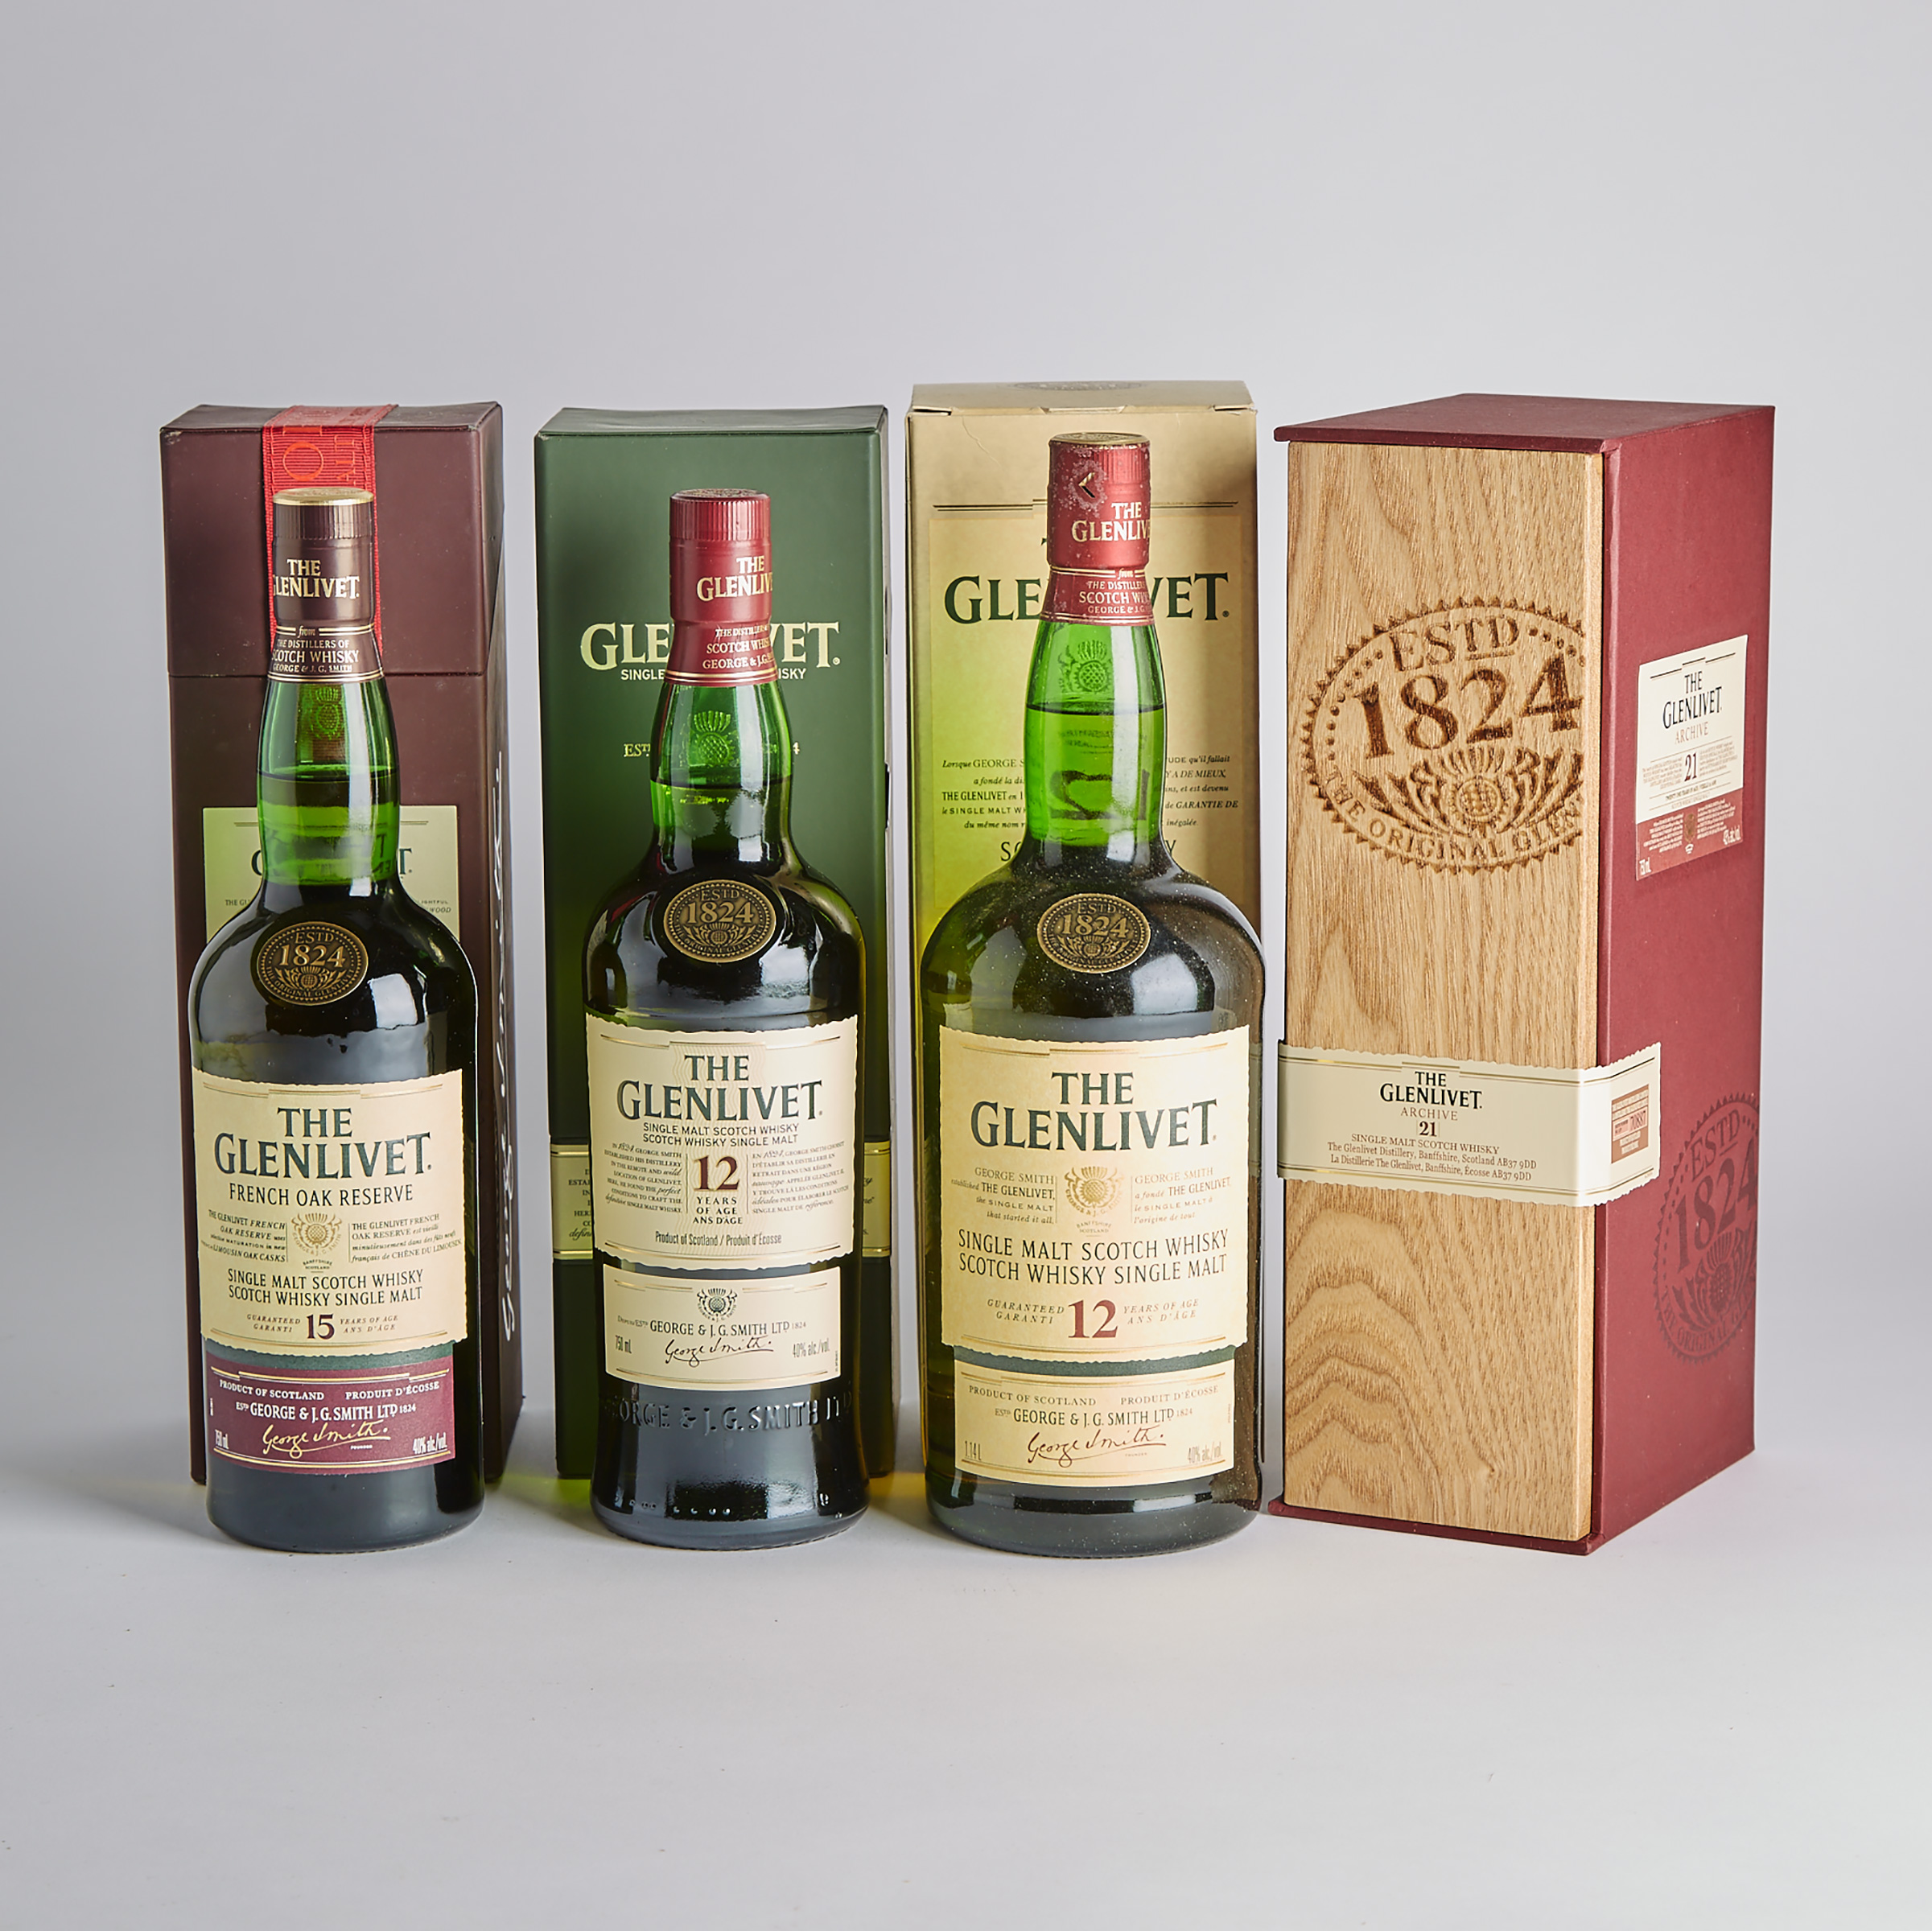 THE GLENLIVET SINGLE MALT SCOTCH WHISKY 15 YEARS (ONE 750 ML)
THE GLENLIVET SINGLE MALT SCOTCH WHISKY 21 YEARS (ONE 750 ML)
THE GLENLIVET SINGLE MALT SCOTCH WHISKY 12 YEARS (ONE 750 ML)
THE GLENLIVET SINGLE MALT SCOTCH WHISKY 12 YEARS (ONE 1.14 L)